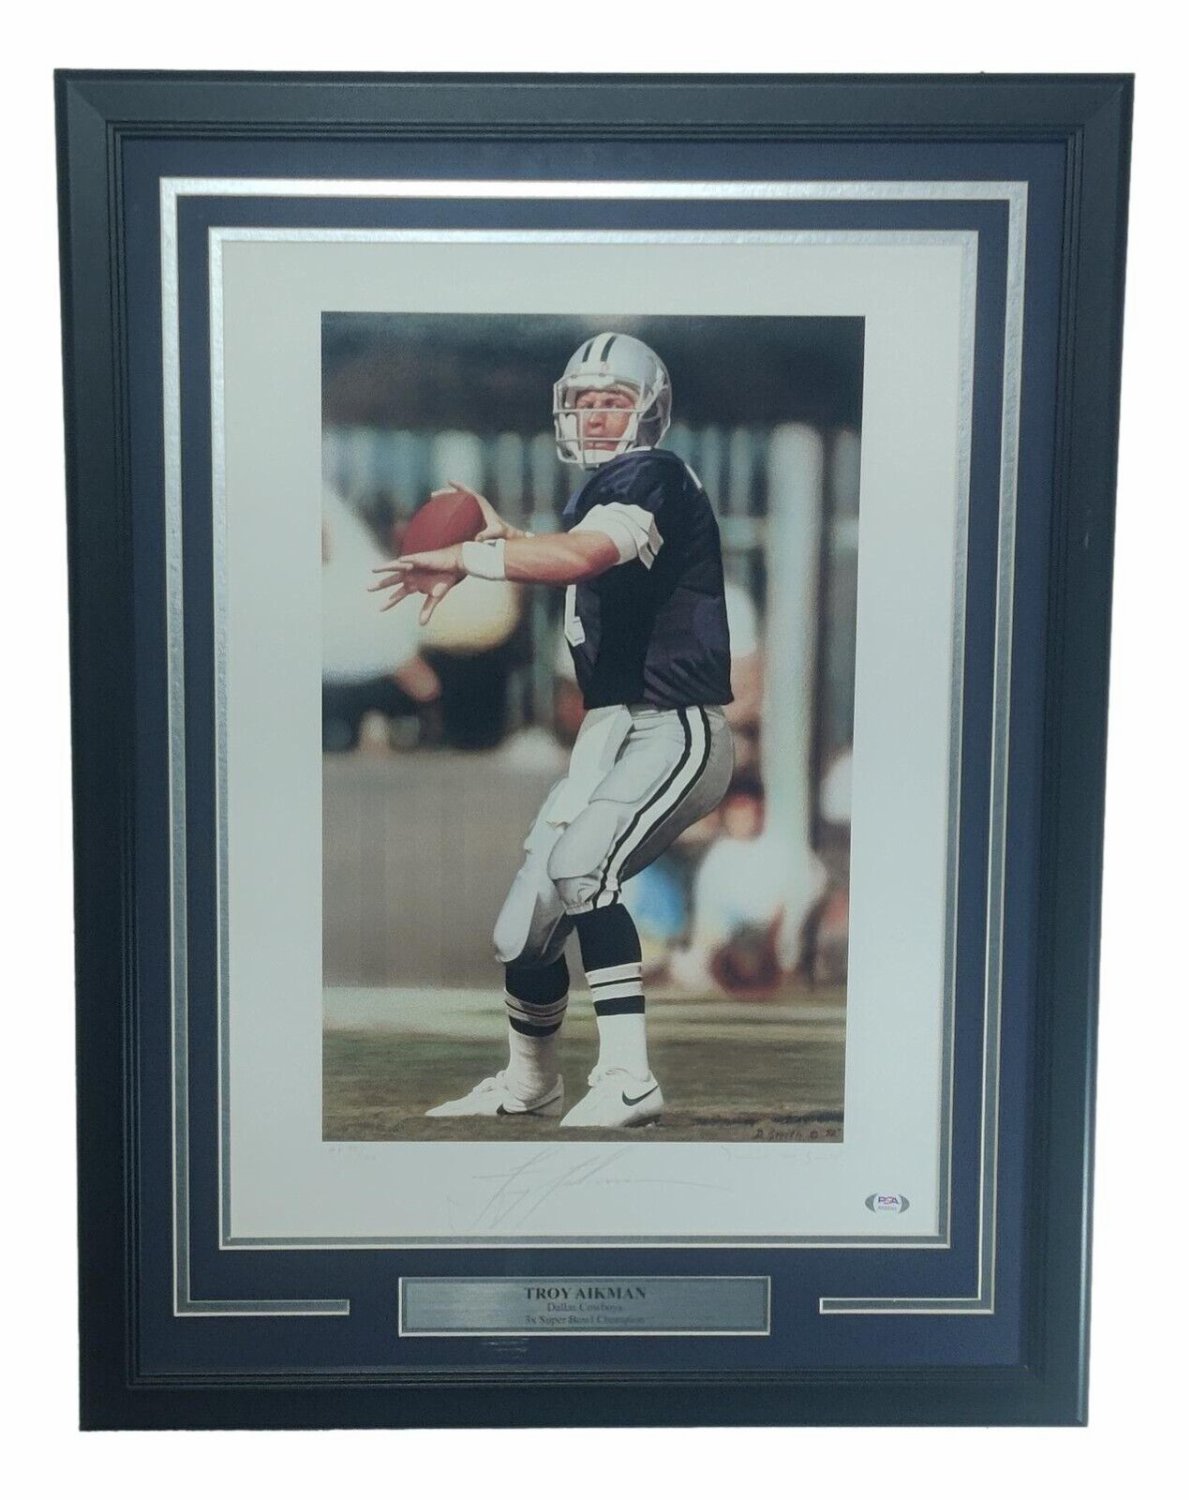 Troy Aikman Autographed Signed 16X20 Lithograph Framed Dallas PSA/DNA